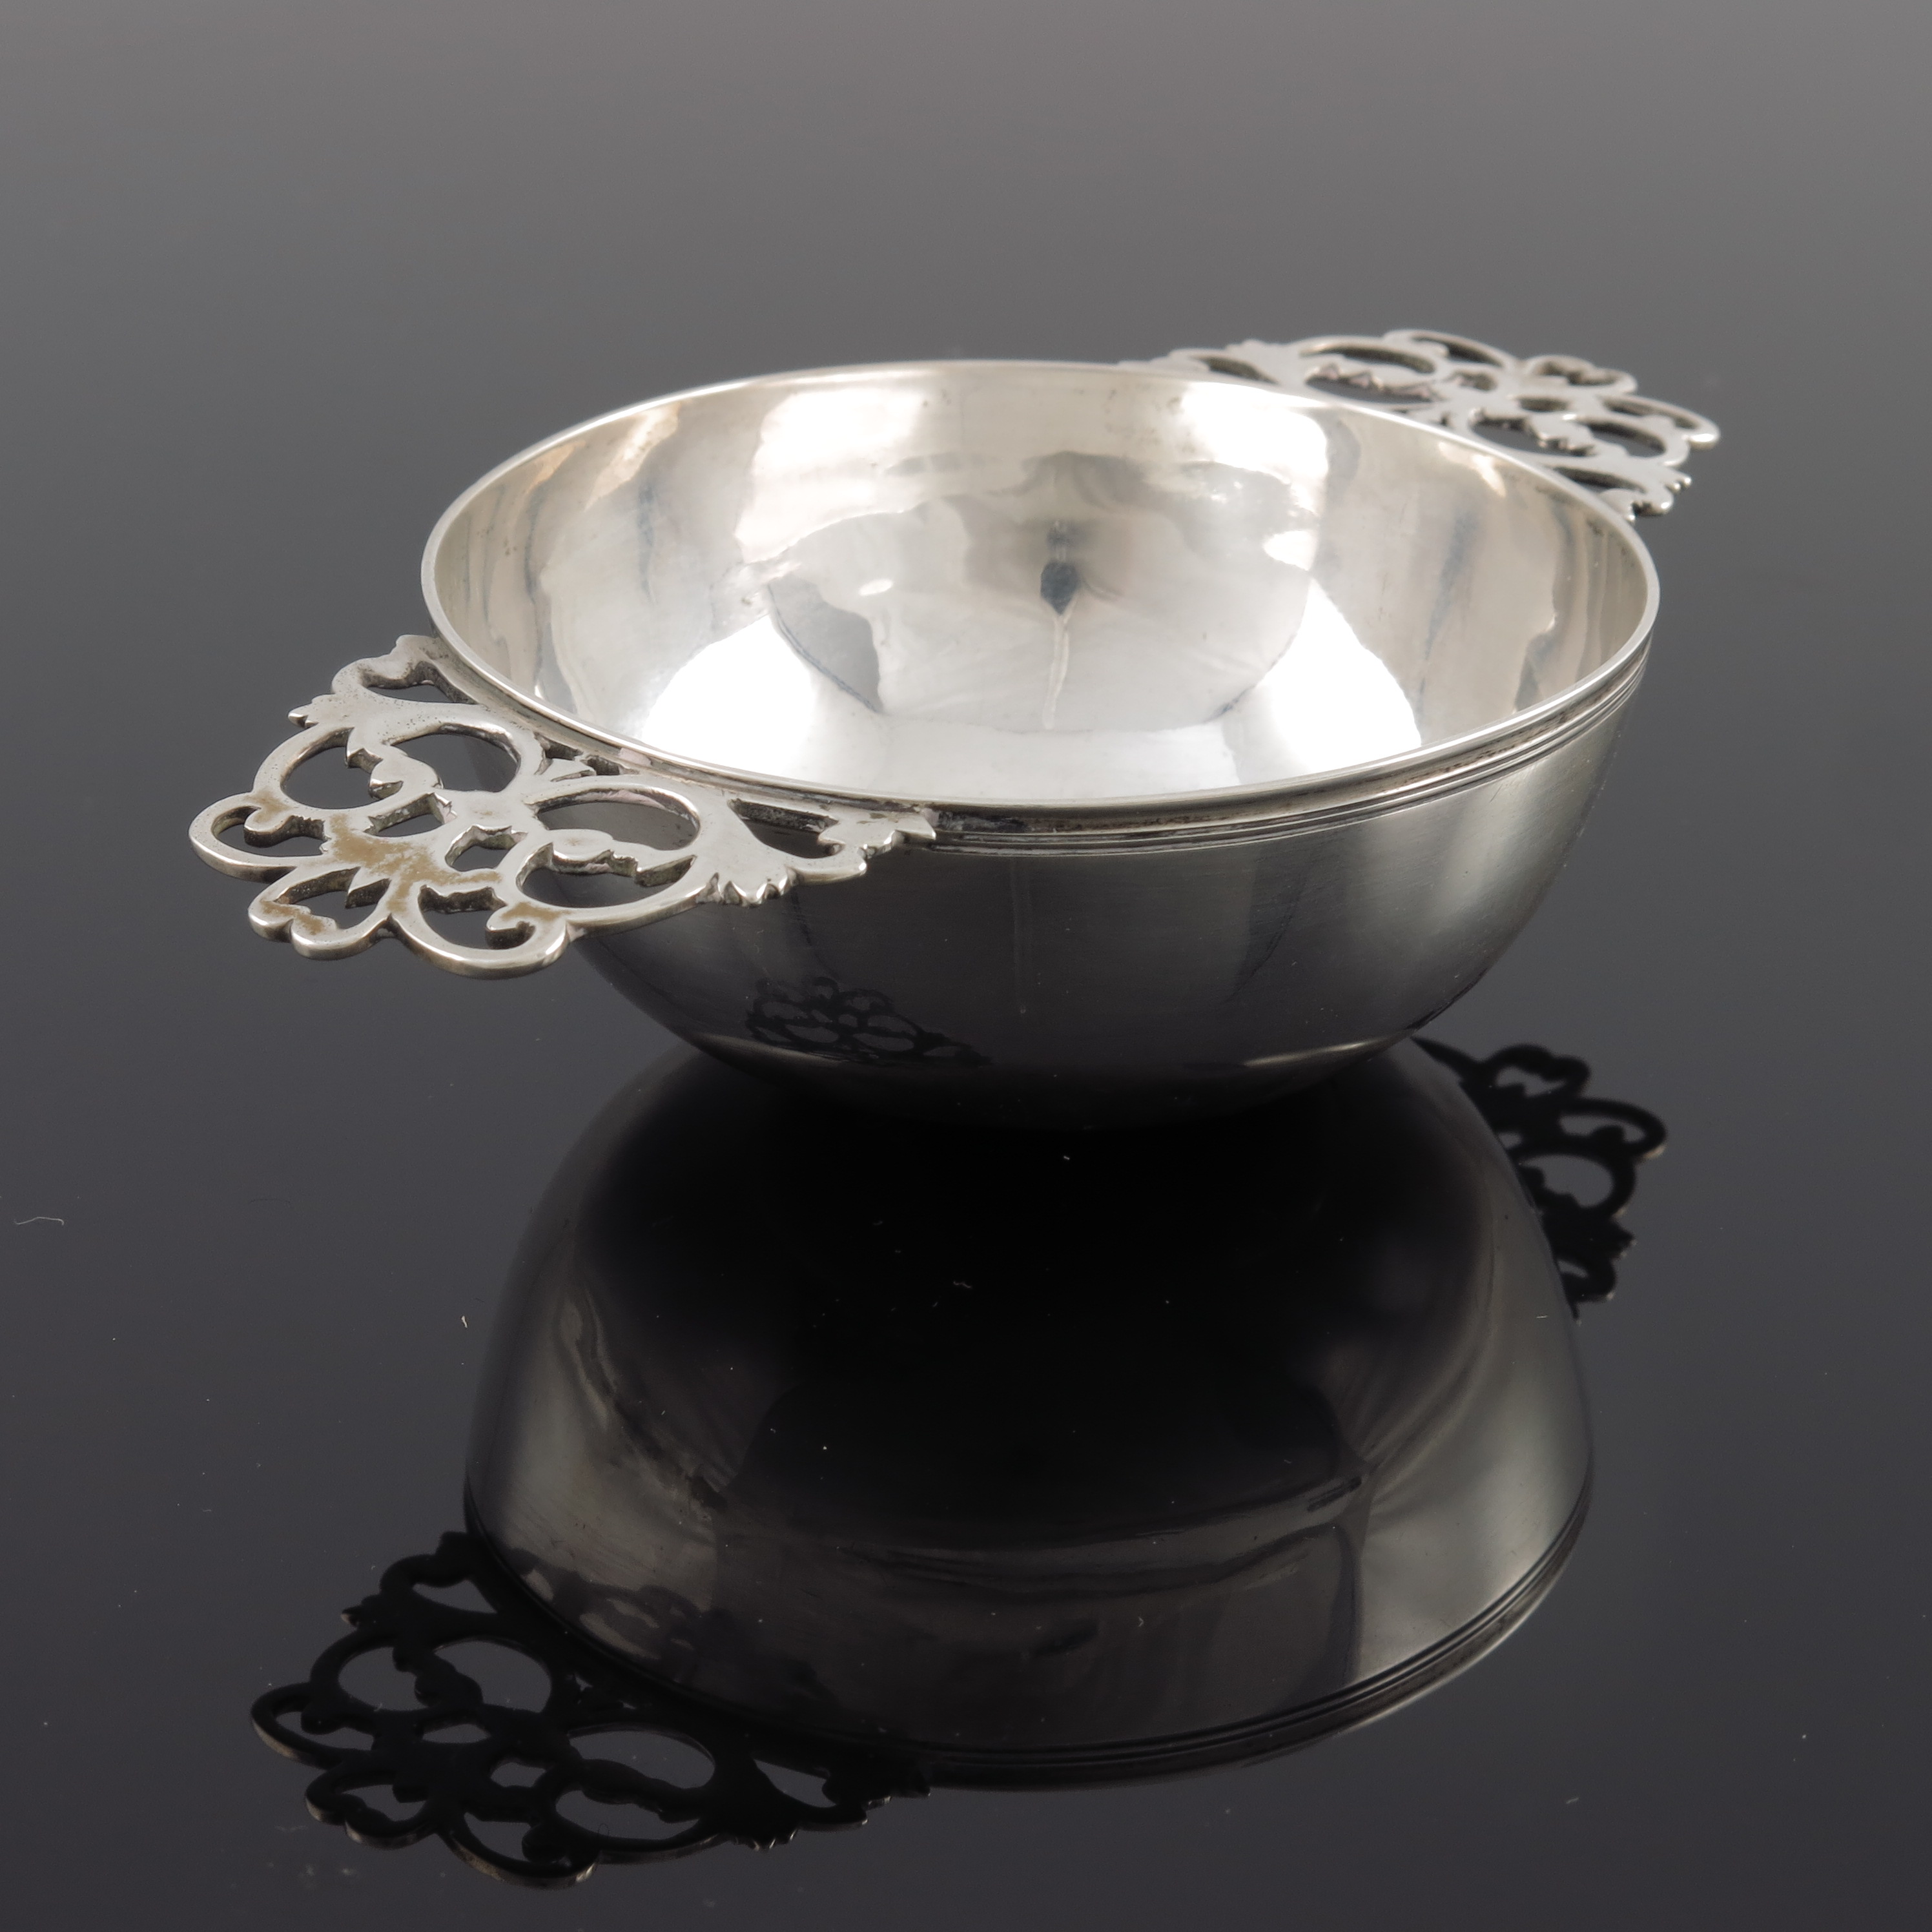 A Victorian silver quaich or twin handled porringer, Wakely and Wheeler, London 1889 - Image 2 of 4